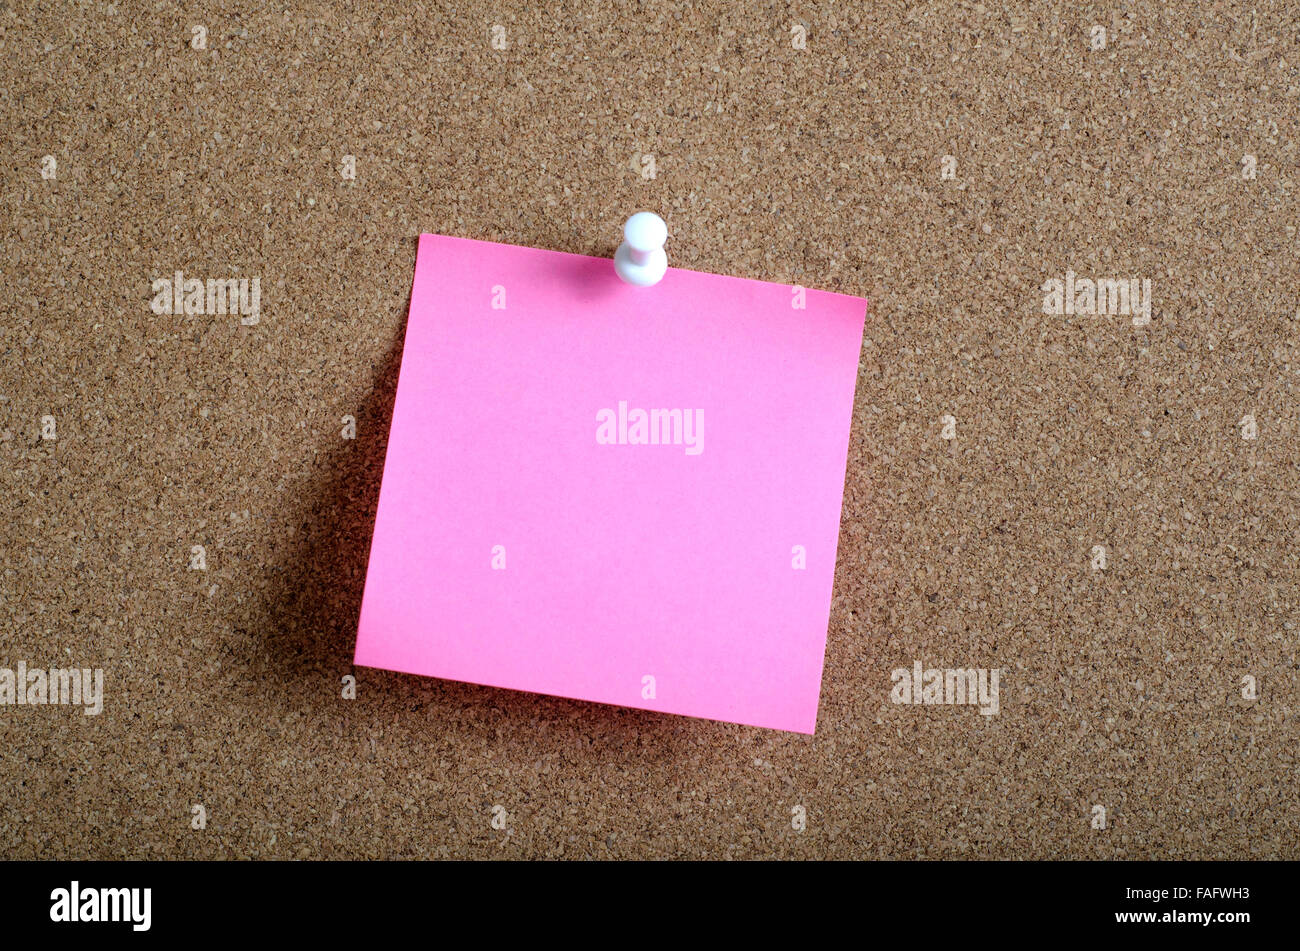 Reminder sticky note on cork board in close up Stock Photo